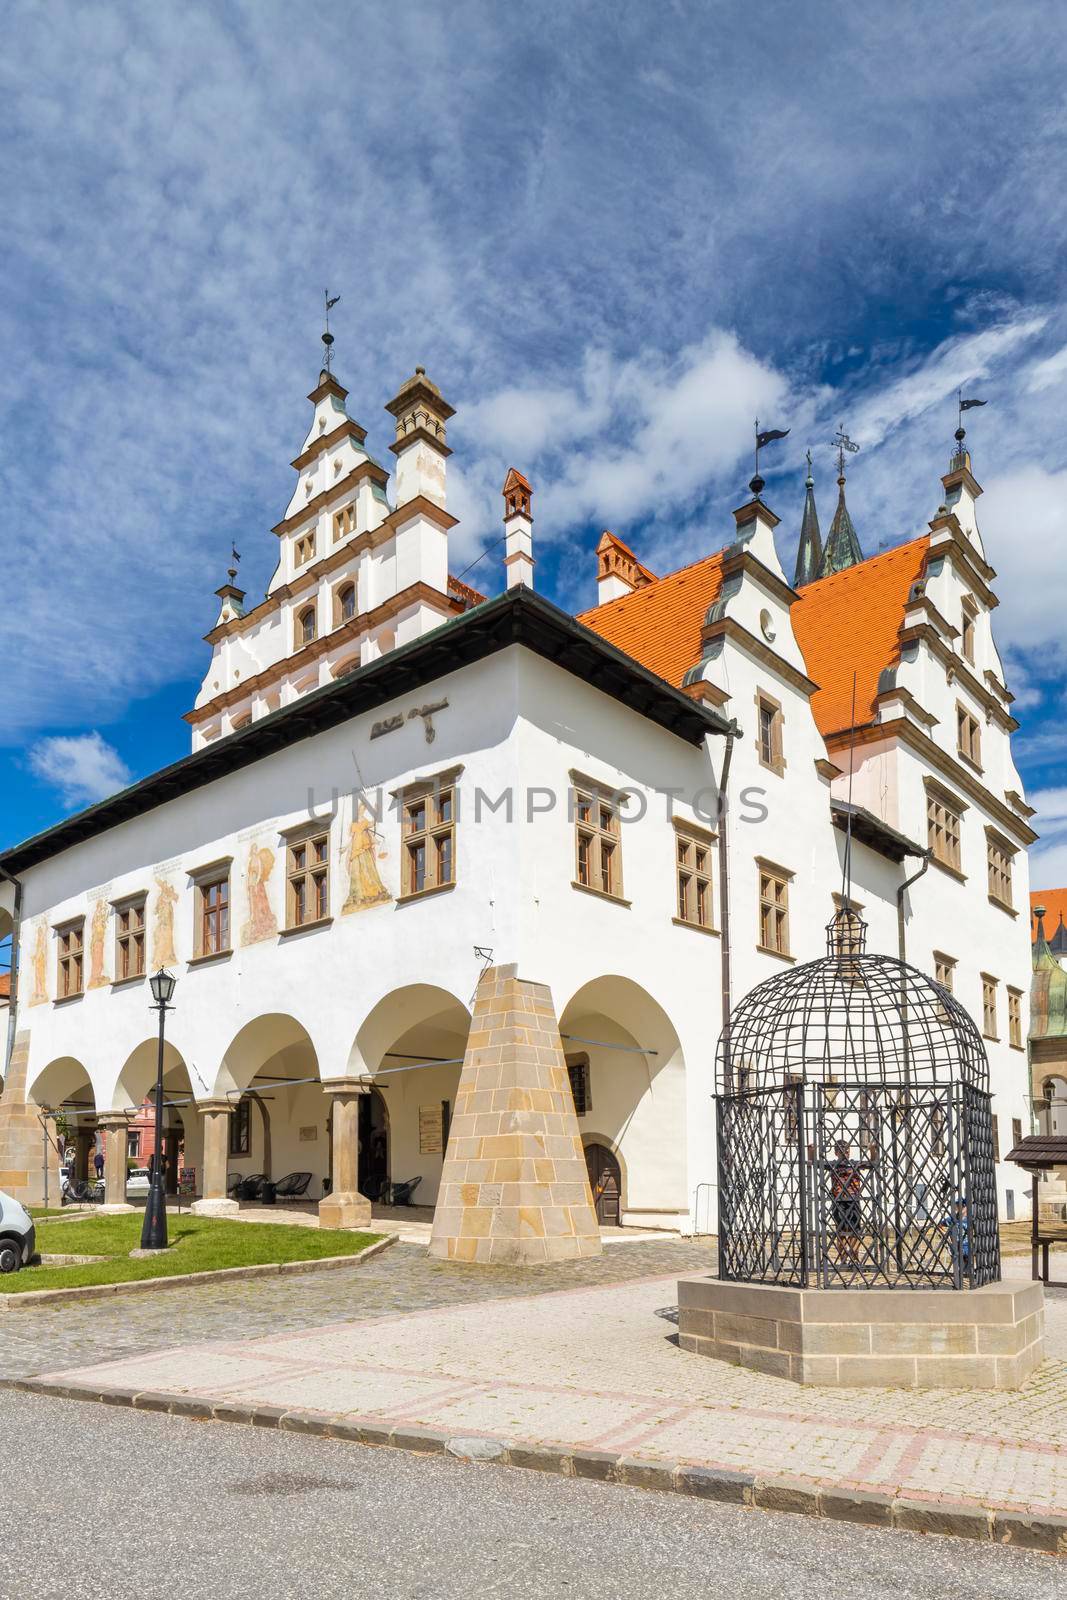 Old Town Hall in Levoca, UNESCO site, Slovakia